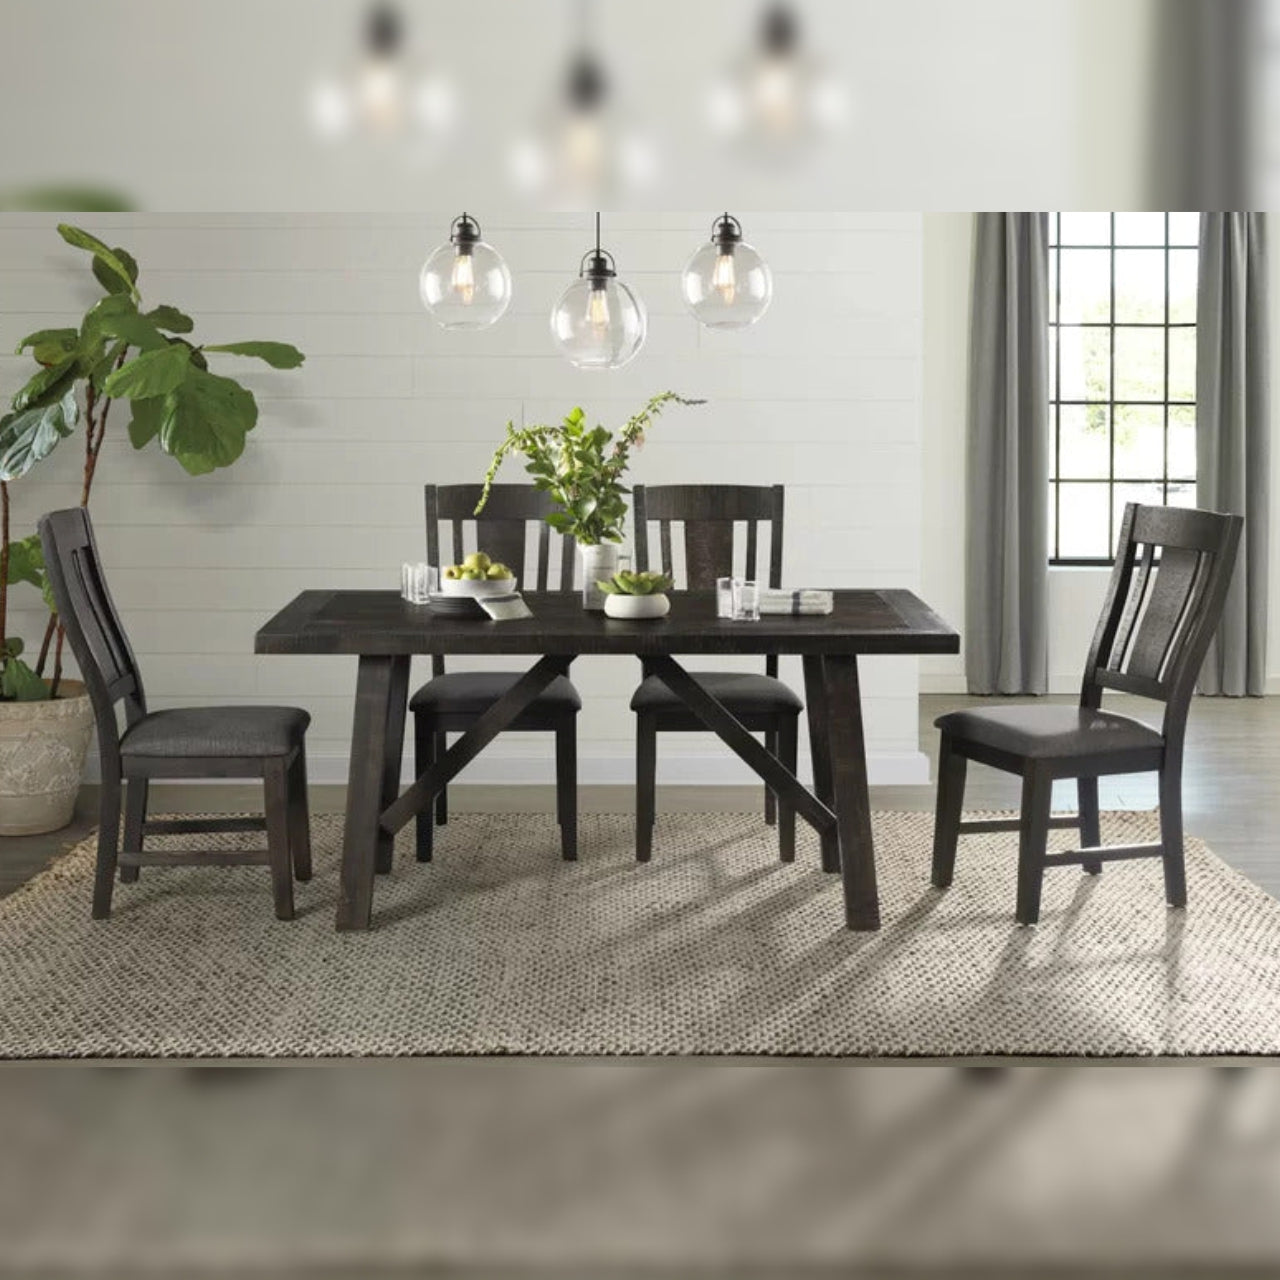 Dining Set: Dining Table with 4 Chairs Dining Set